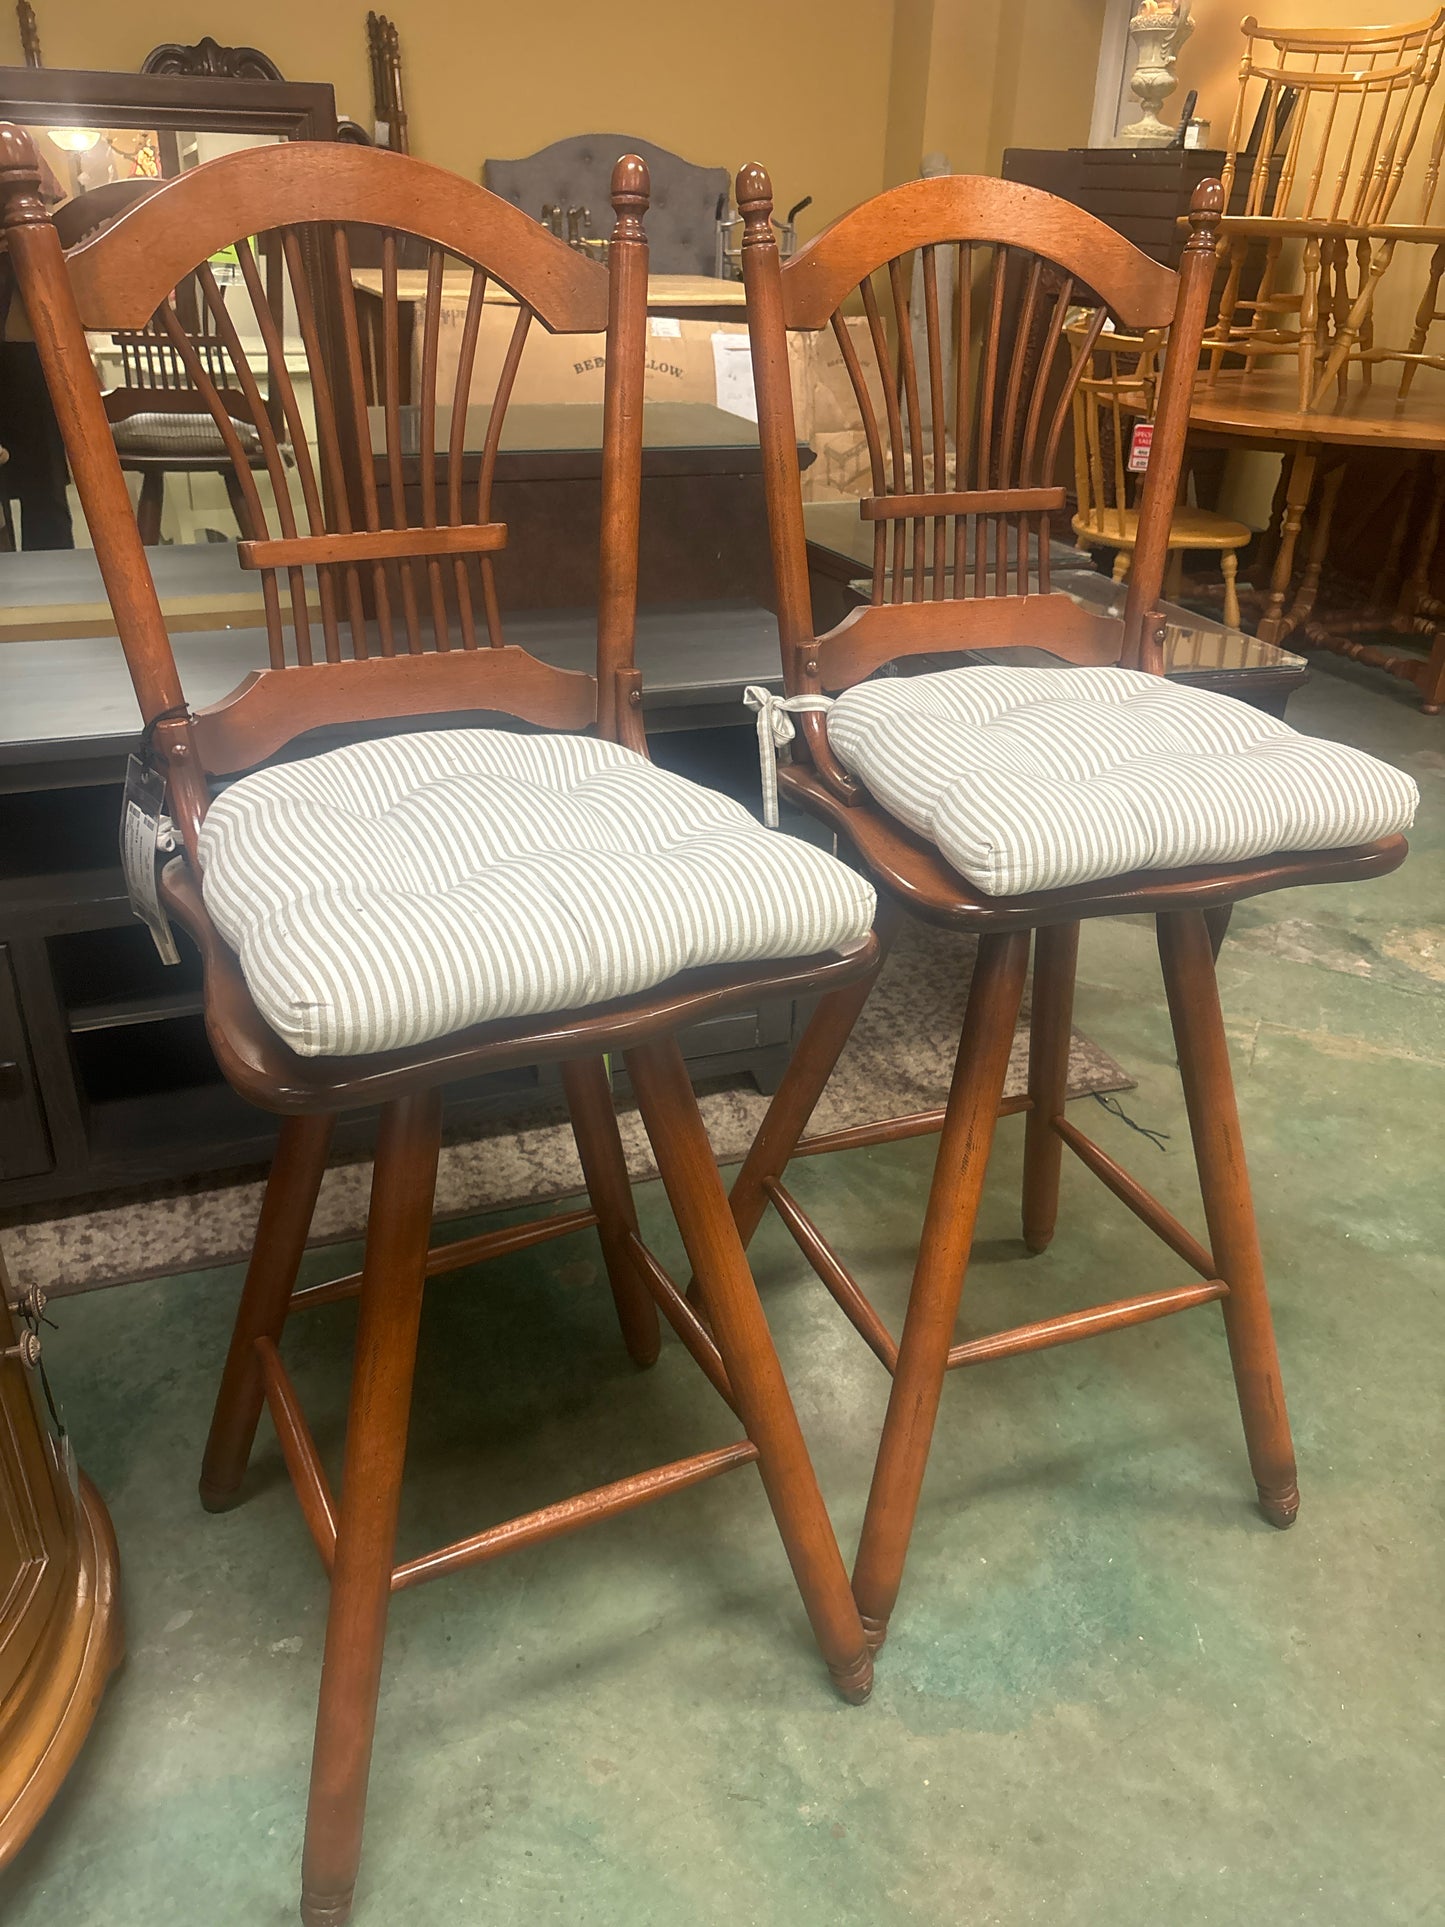 PAIR of Bar Height Wooden Stools with Striped Cream & Beige Cushions